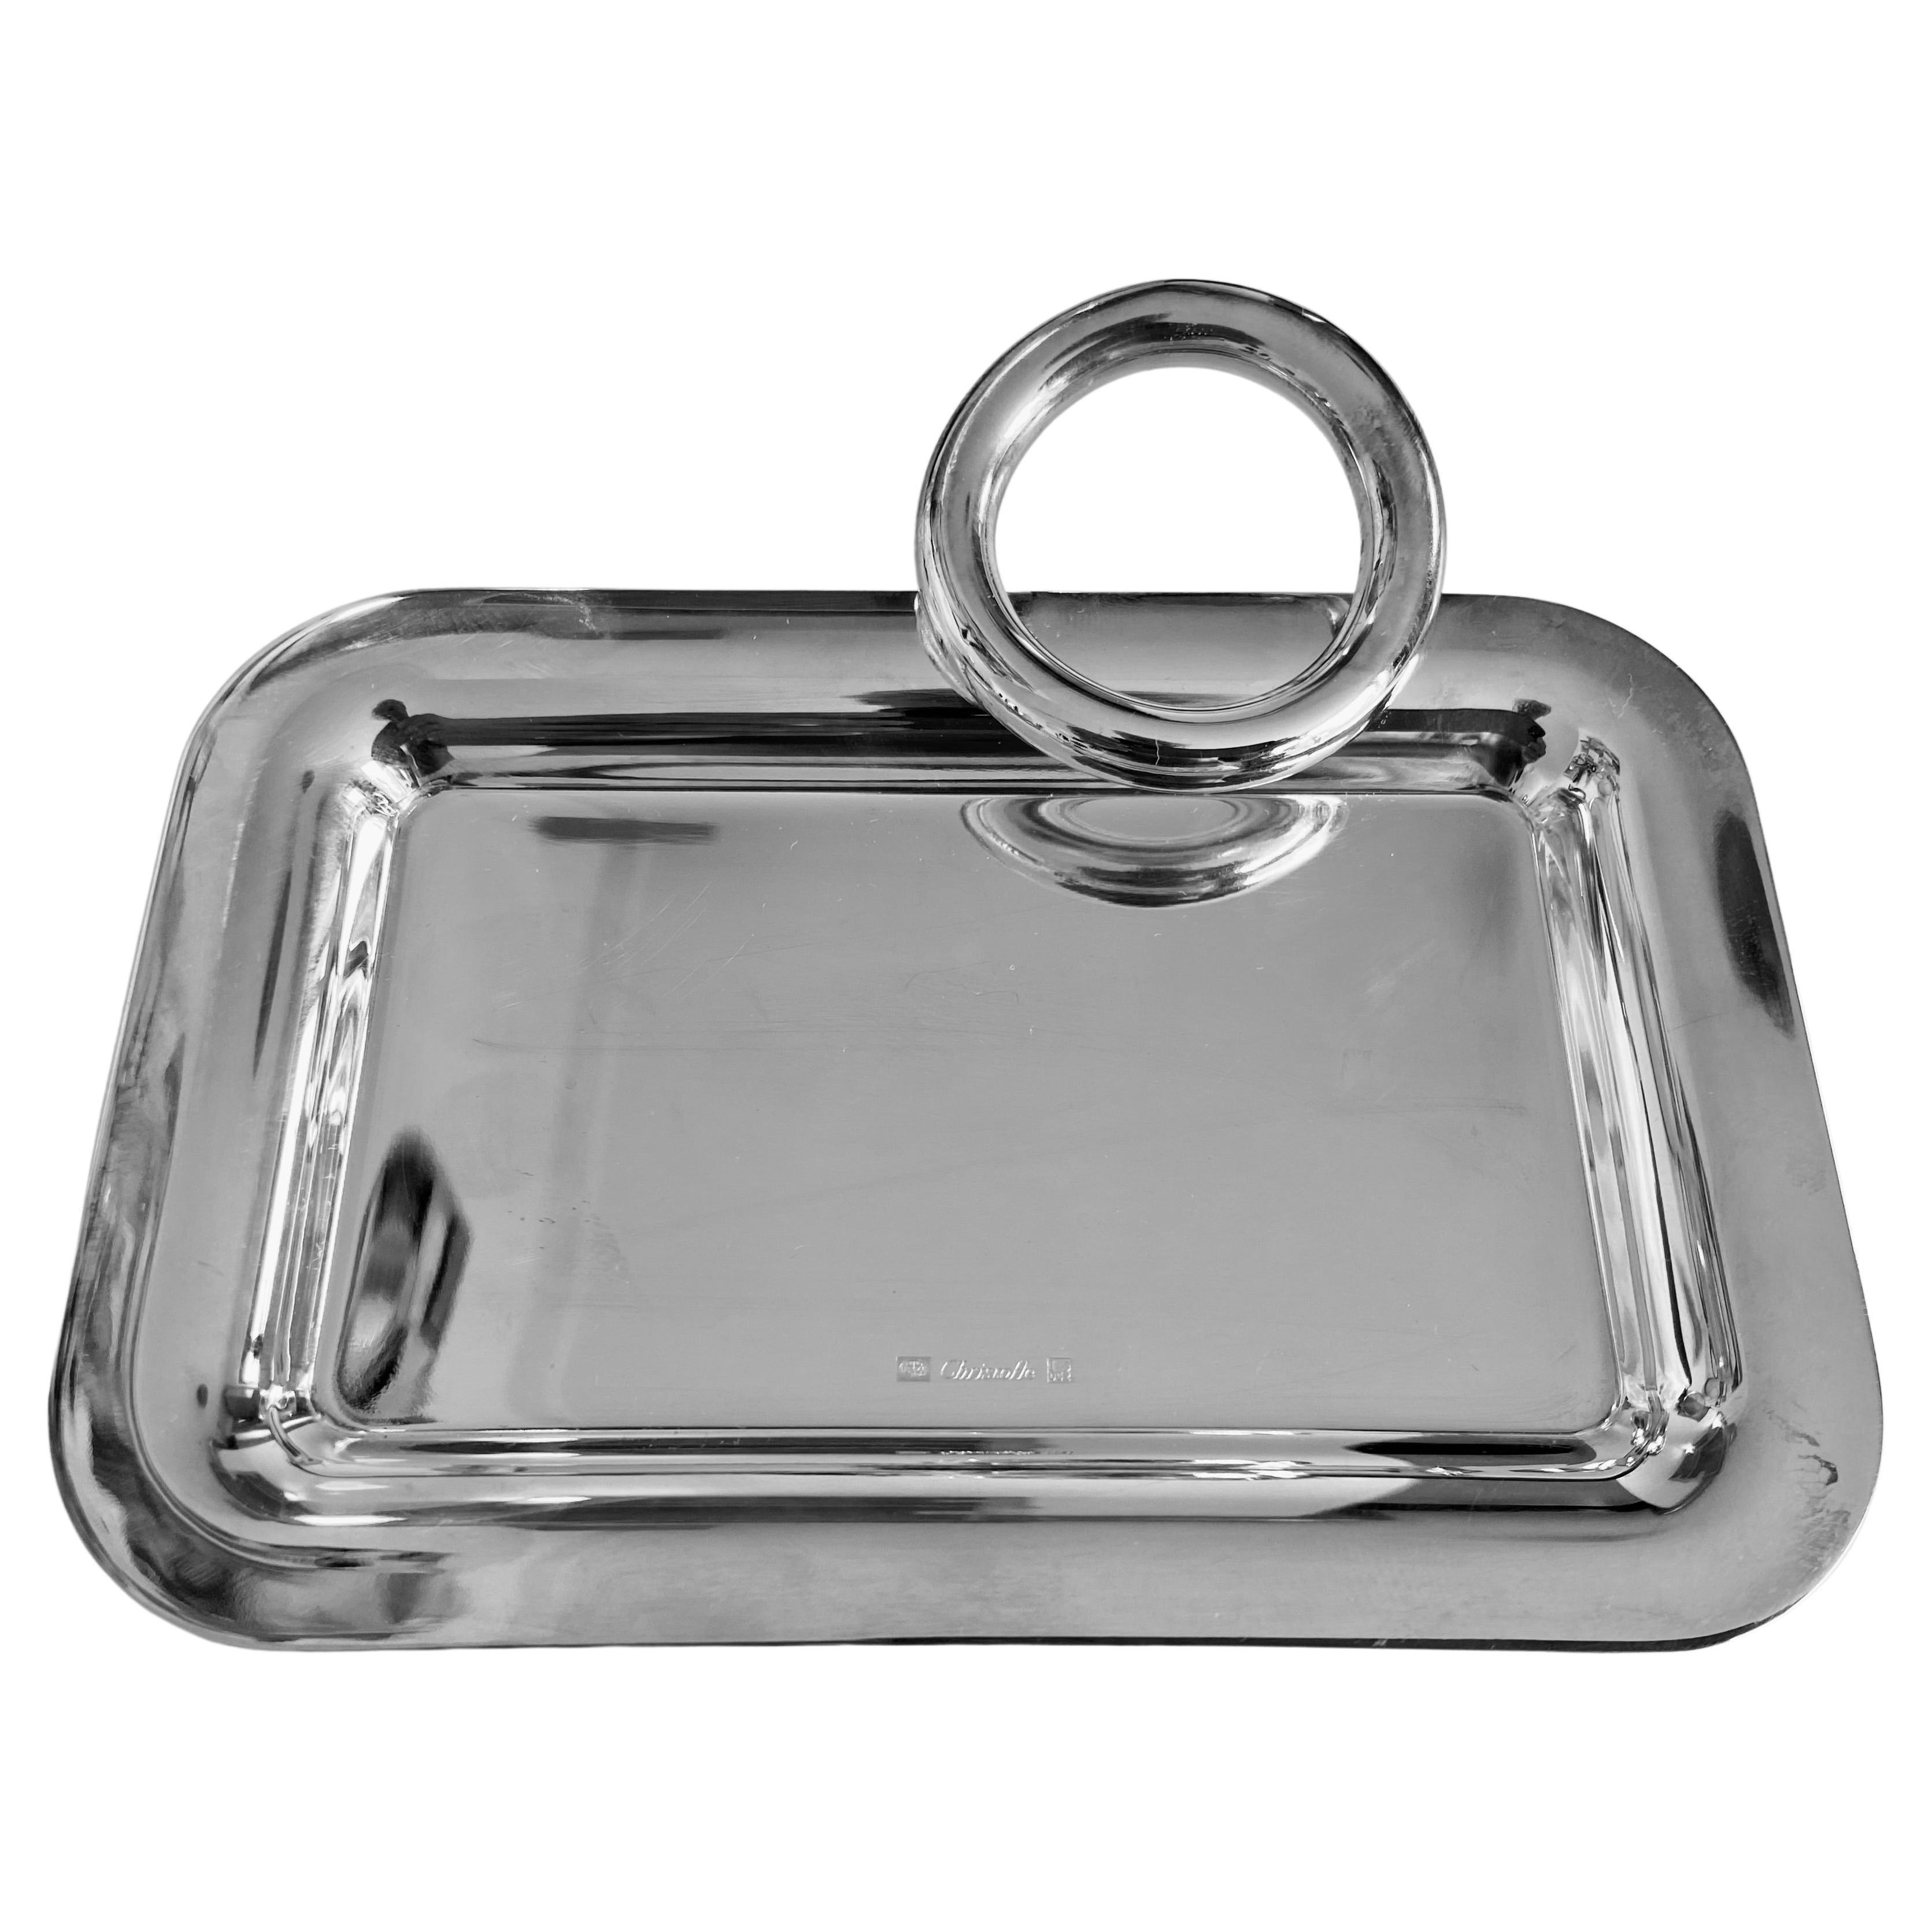 Christofle business card tray For Sale